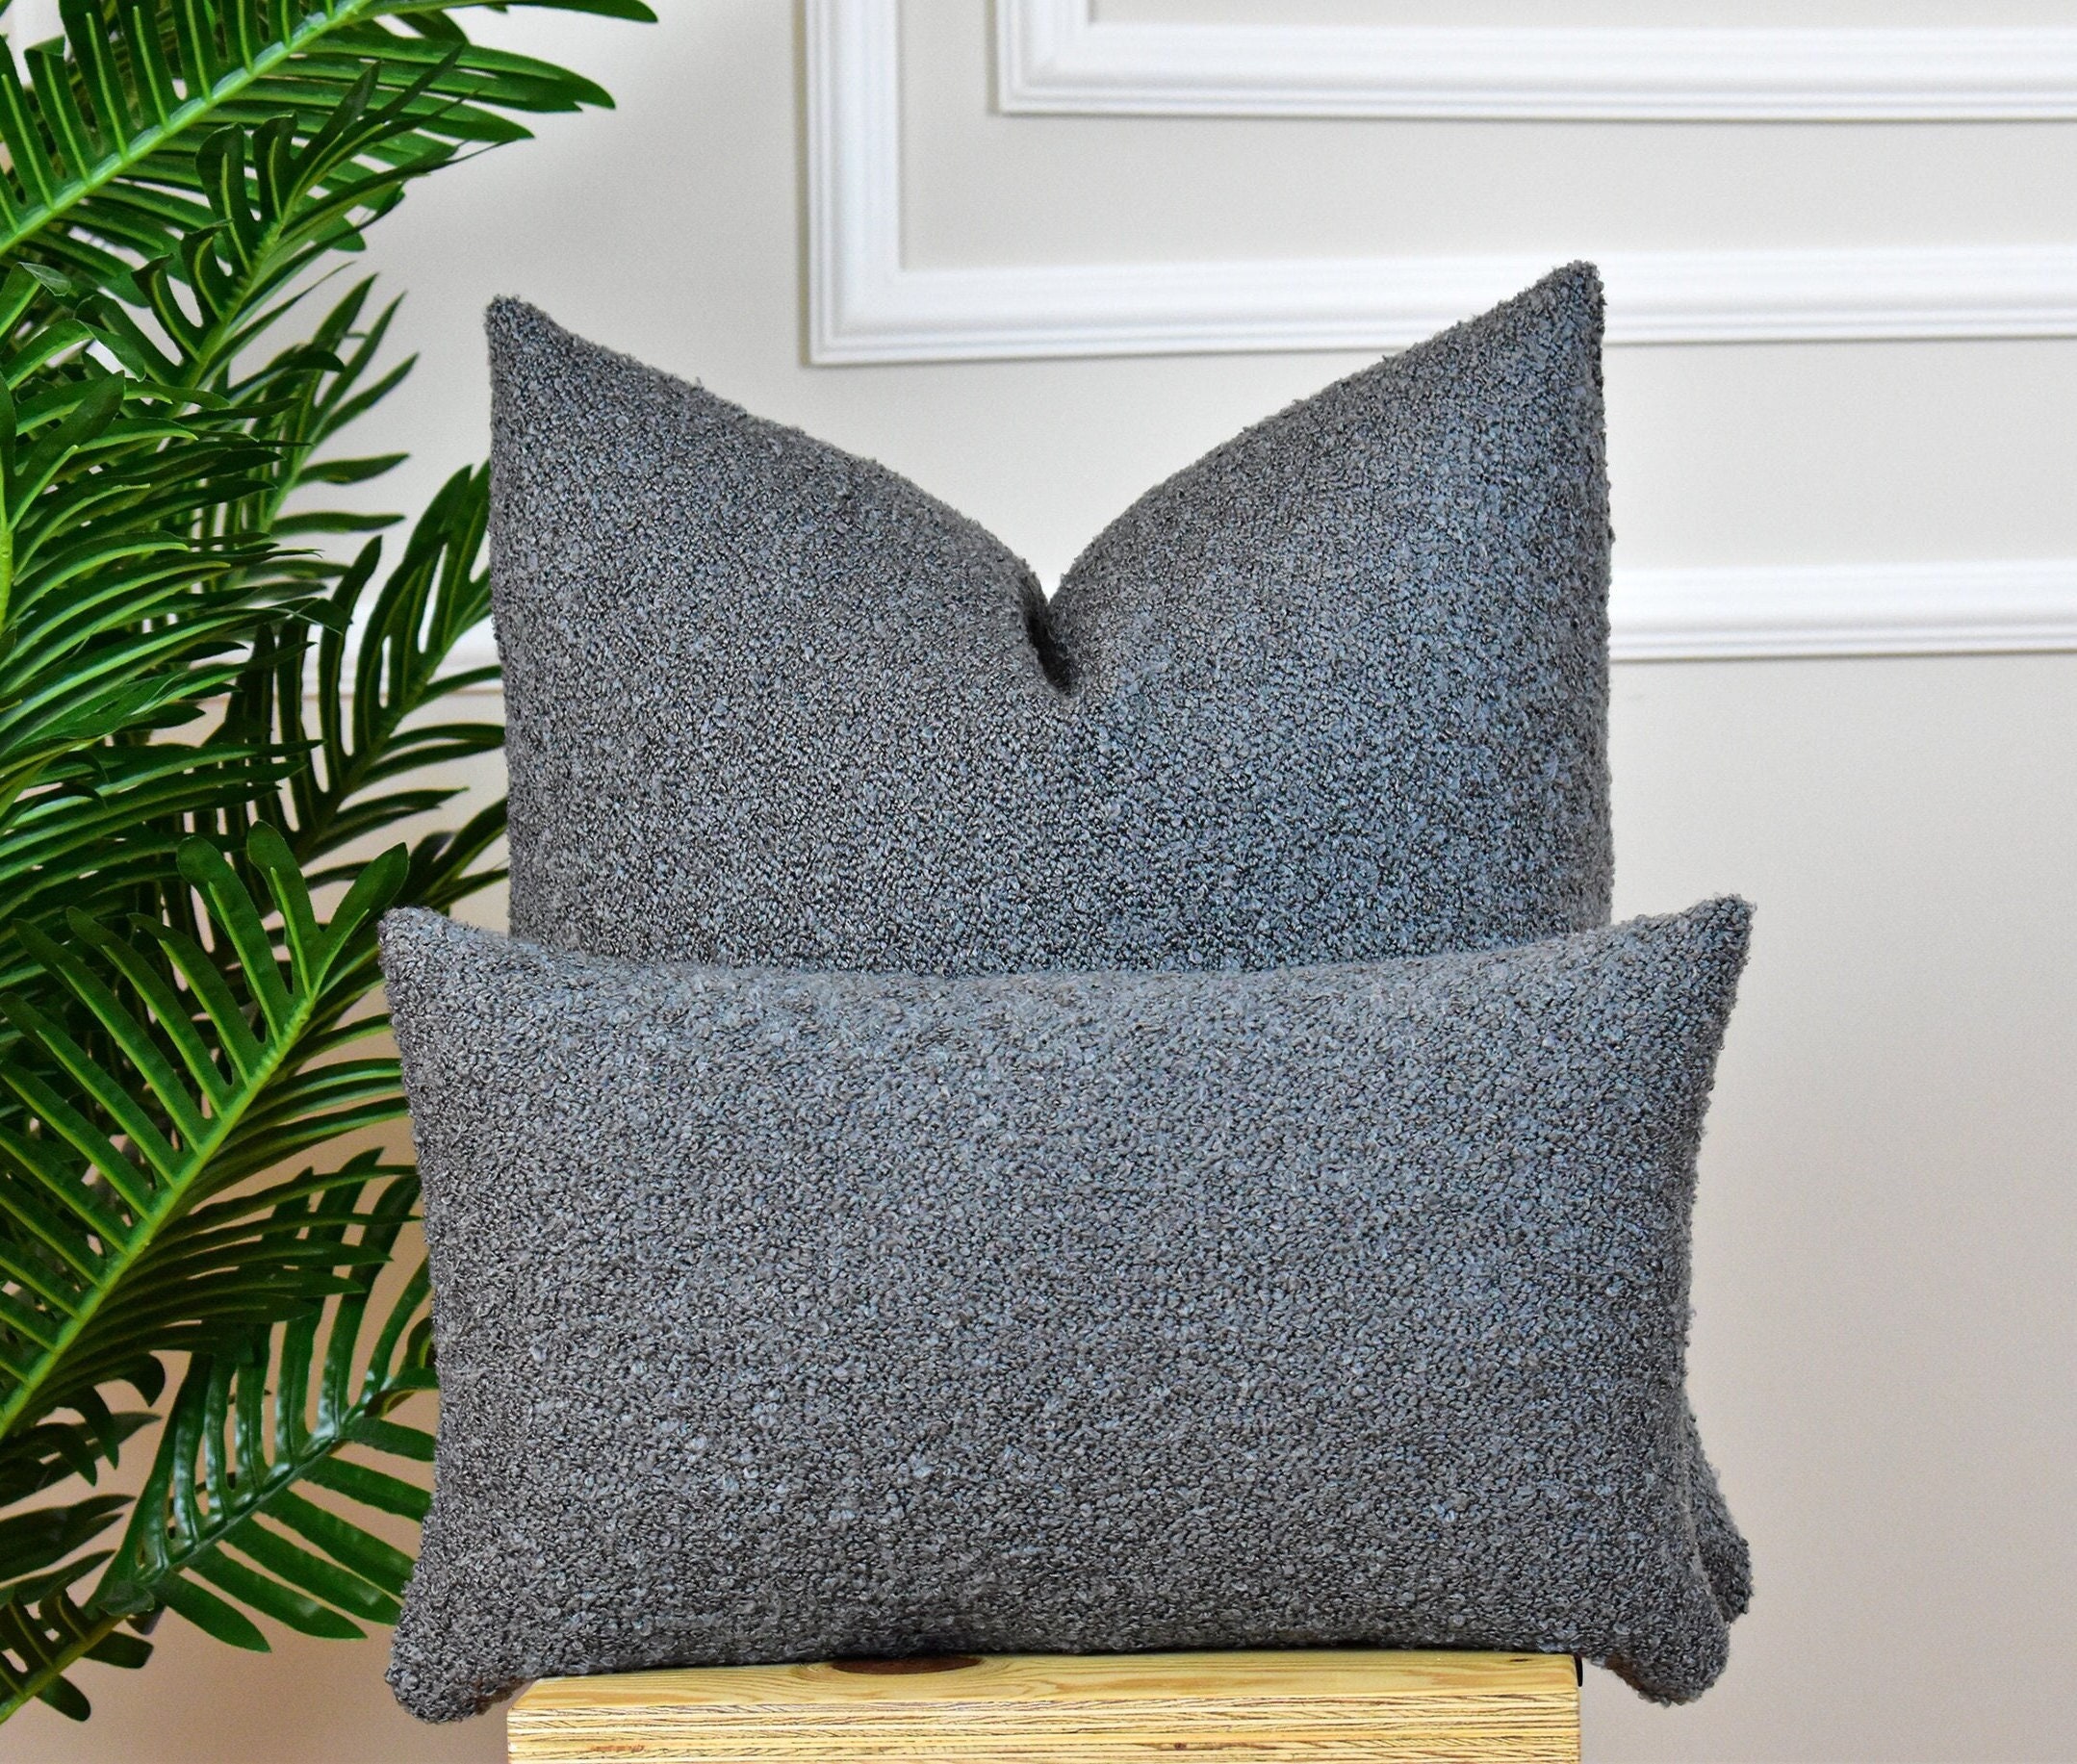 White Textured Puffy Boucle Pillow Cover, Unique Cozy Luxury Boucle Cushion,  Extra Soft Boucle Fabric, Teddy Lumbar Pillow, Living Room,sofa 